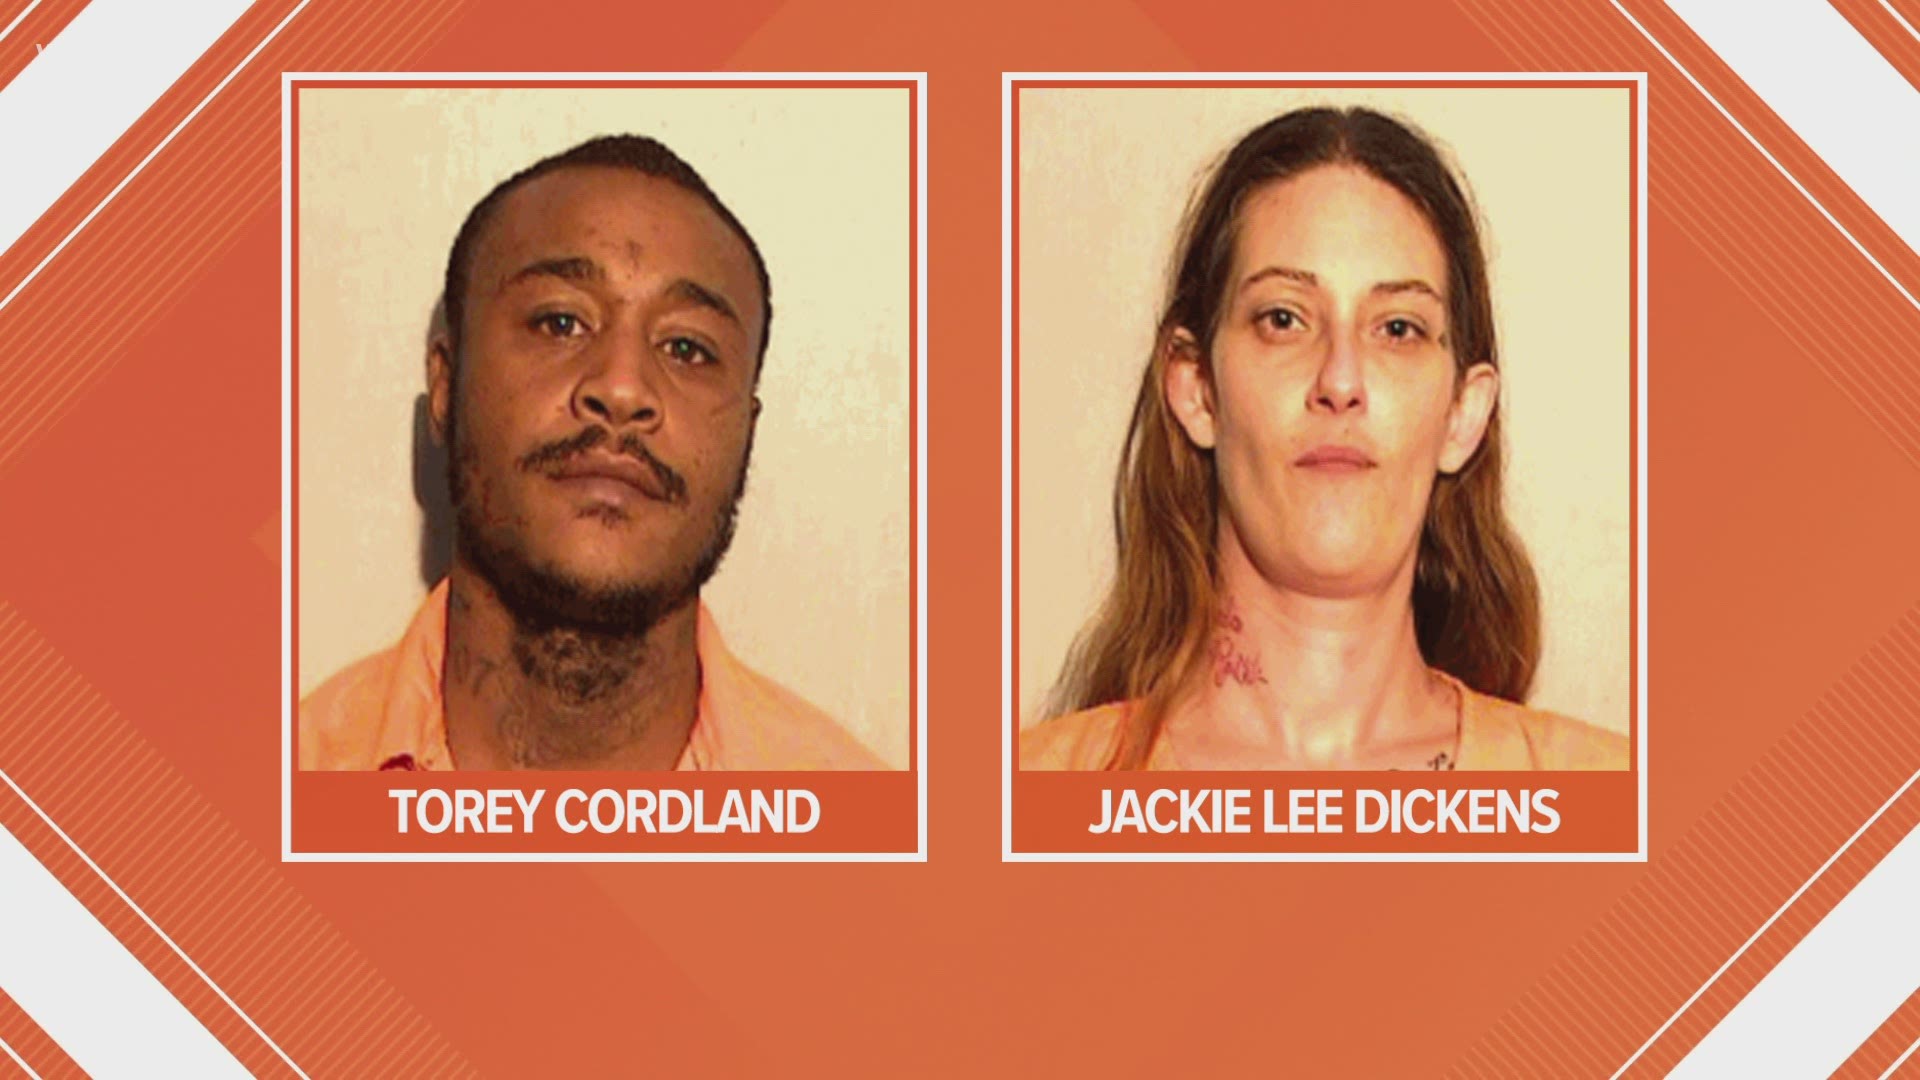 Jackie Dickens and Torey Cordland were arrested after allegedly holding a woman in a locked room for several days. Dickens burned part of the woman's head and hair.